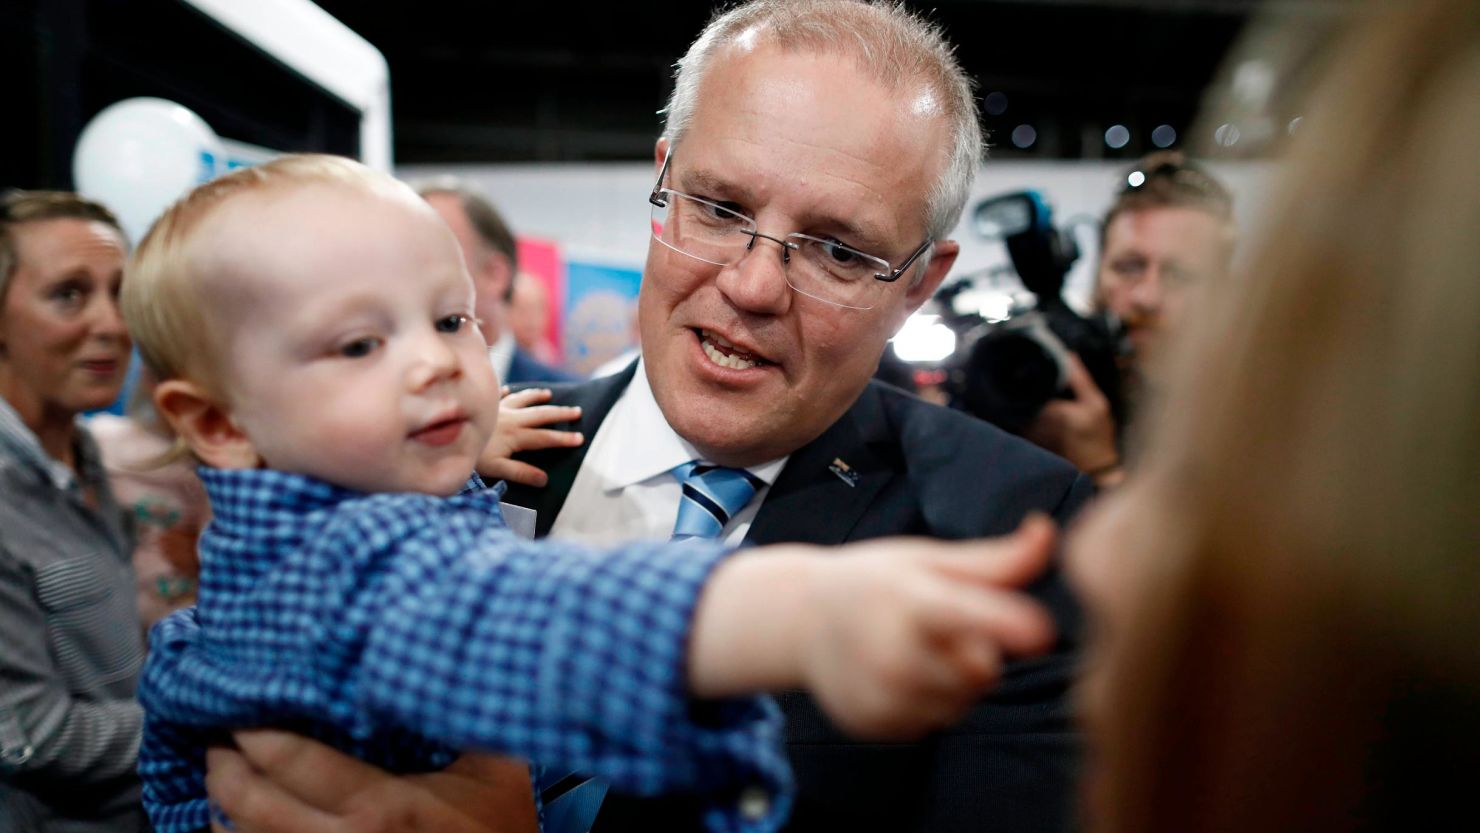 Scott Morrison, Prime Minister of Australia, holds a baby during a Liberal Party Campaign Rally at Launceston Airport on April 18, 2019 in Launceston, Australia. 